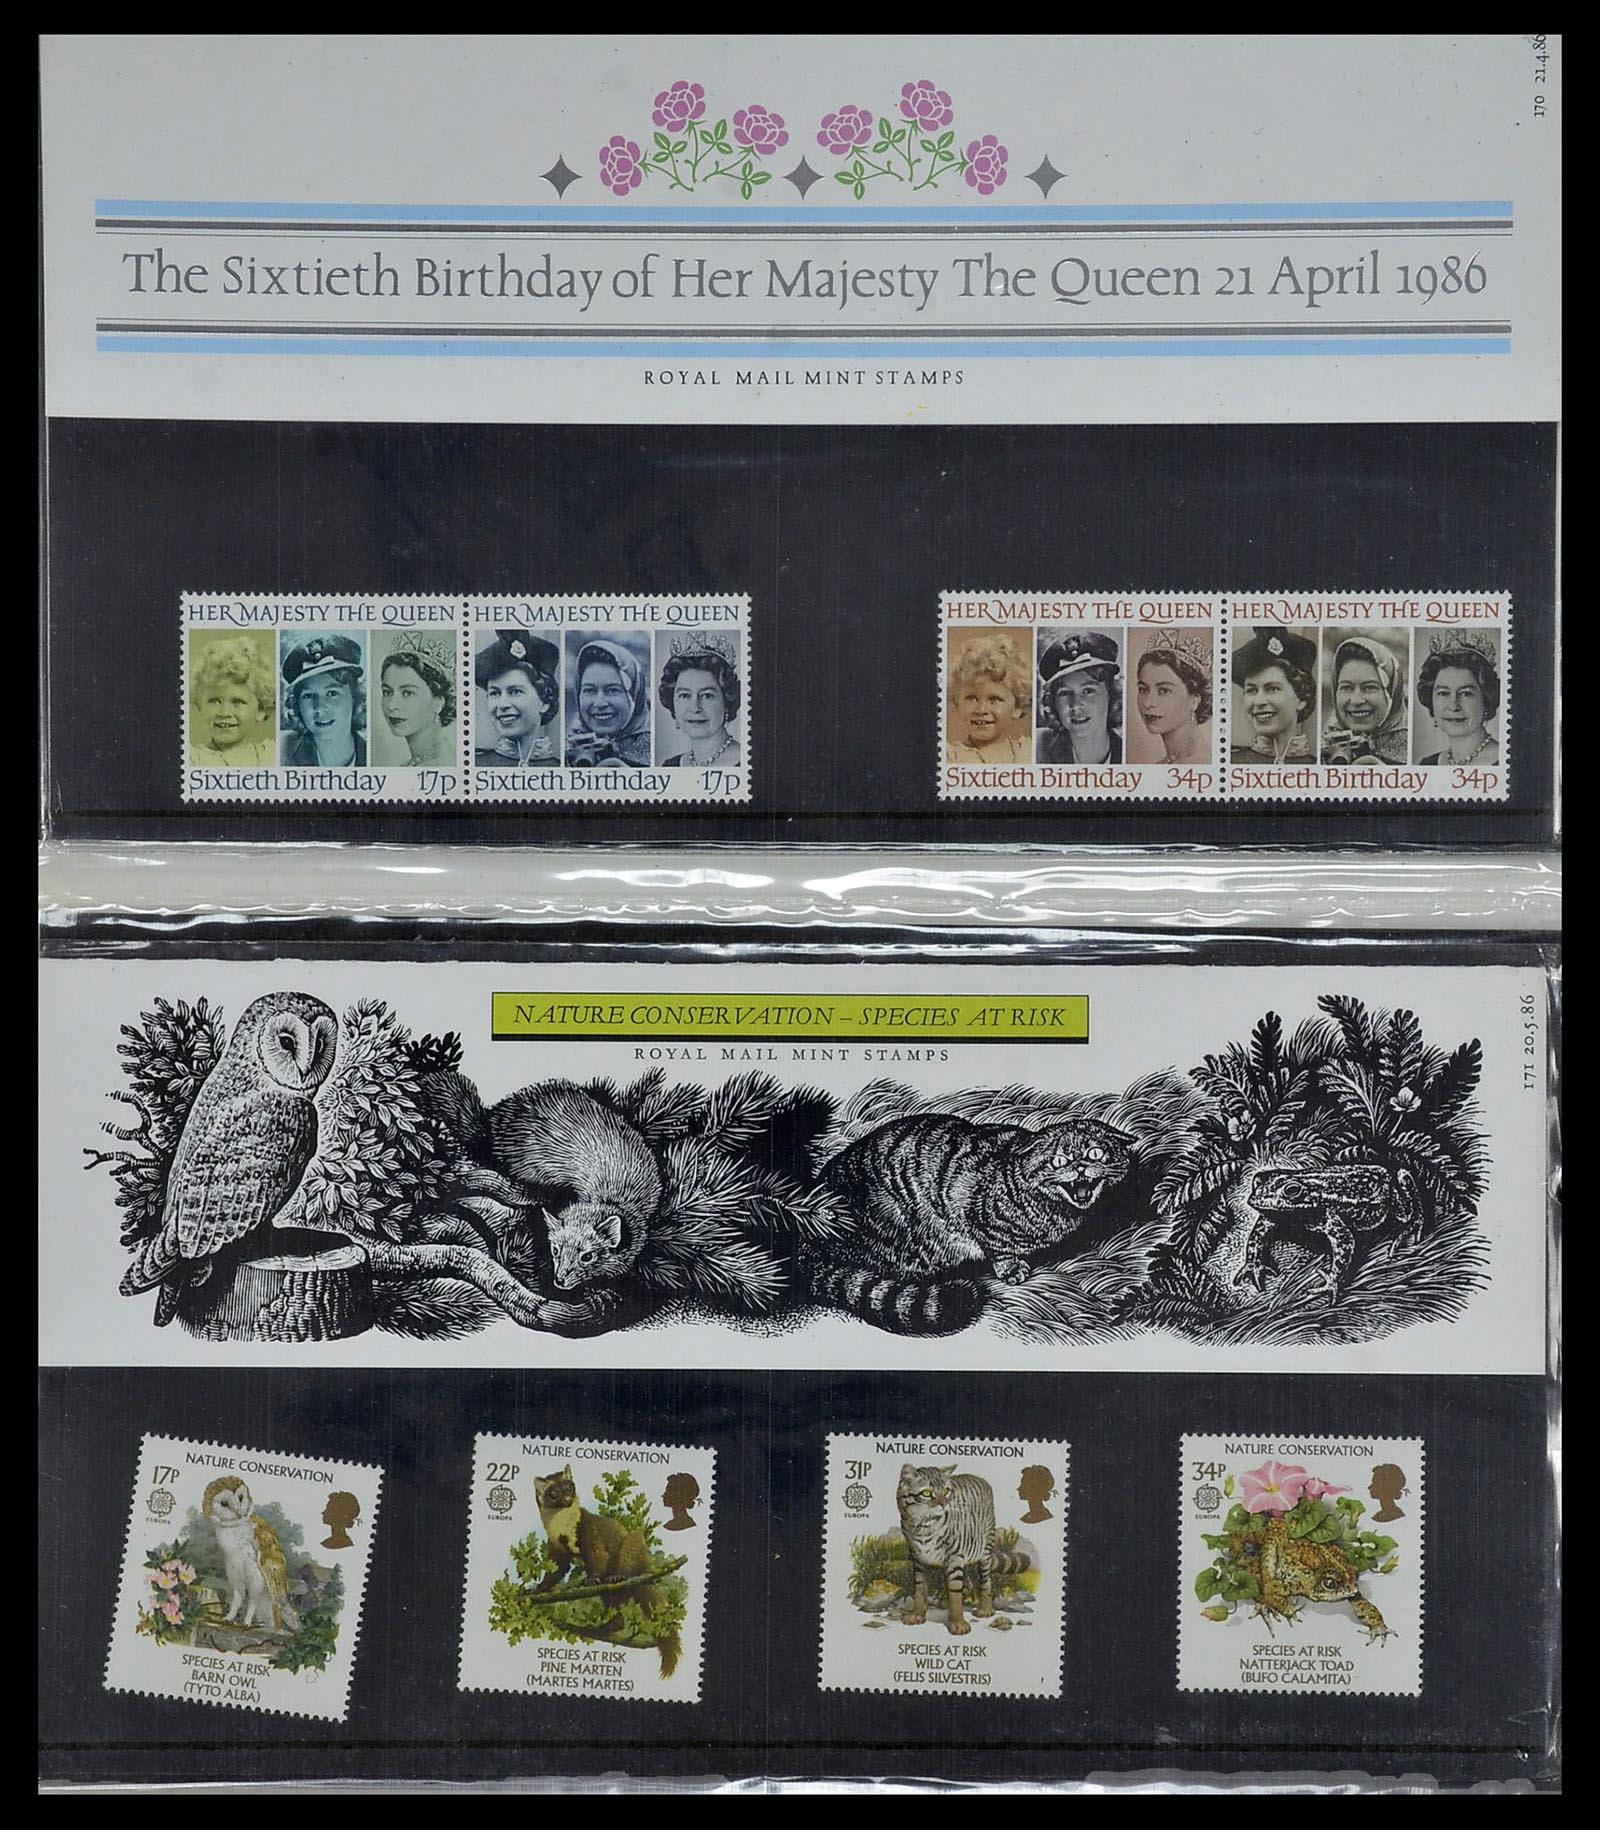 34029 030 - Stamp collection 34029 Great Britain presentation packs 1978-2004.